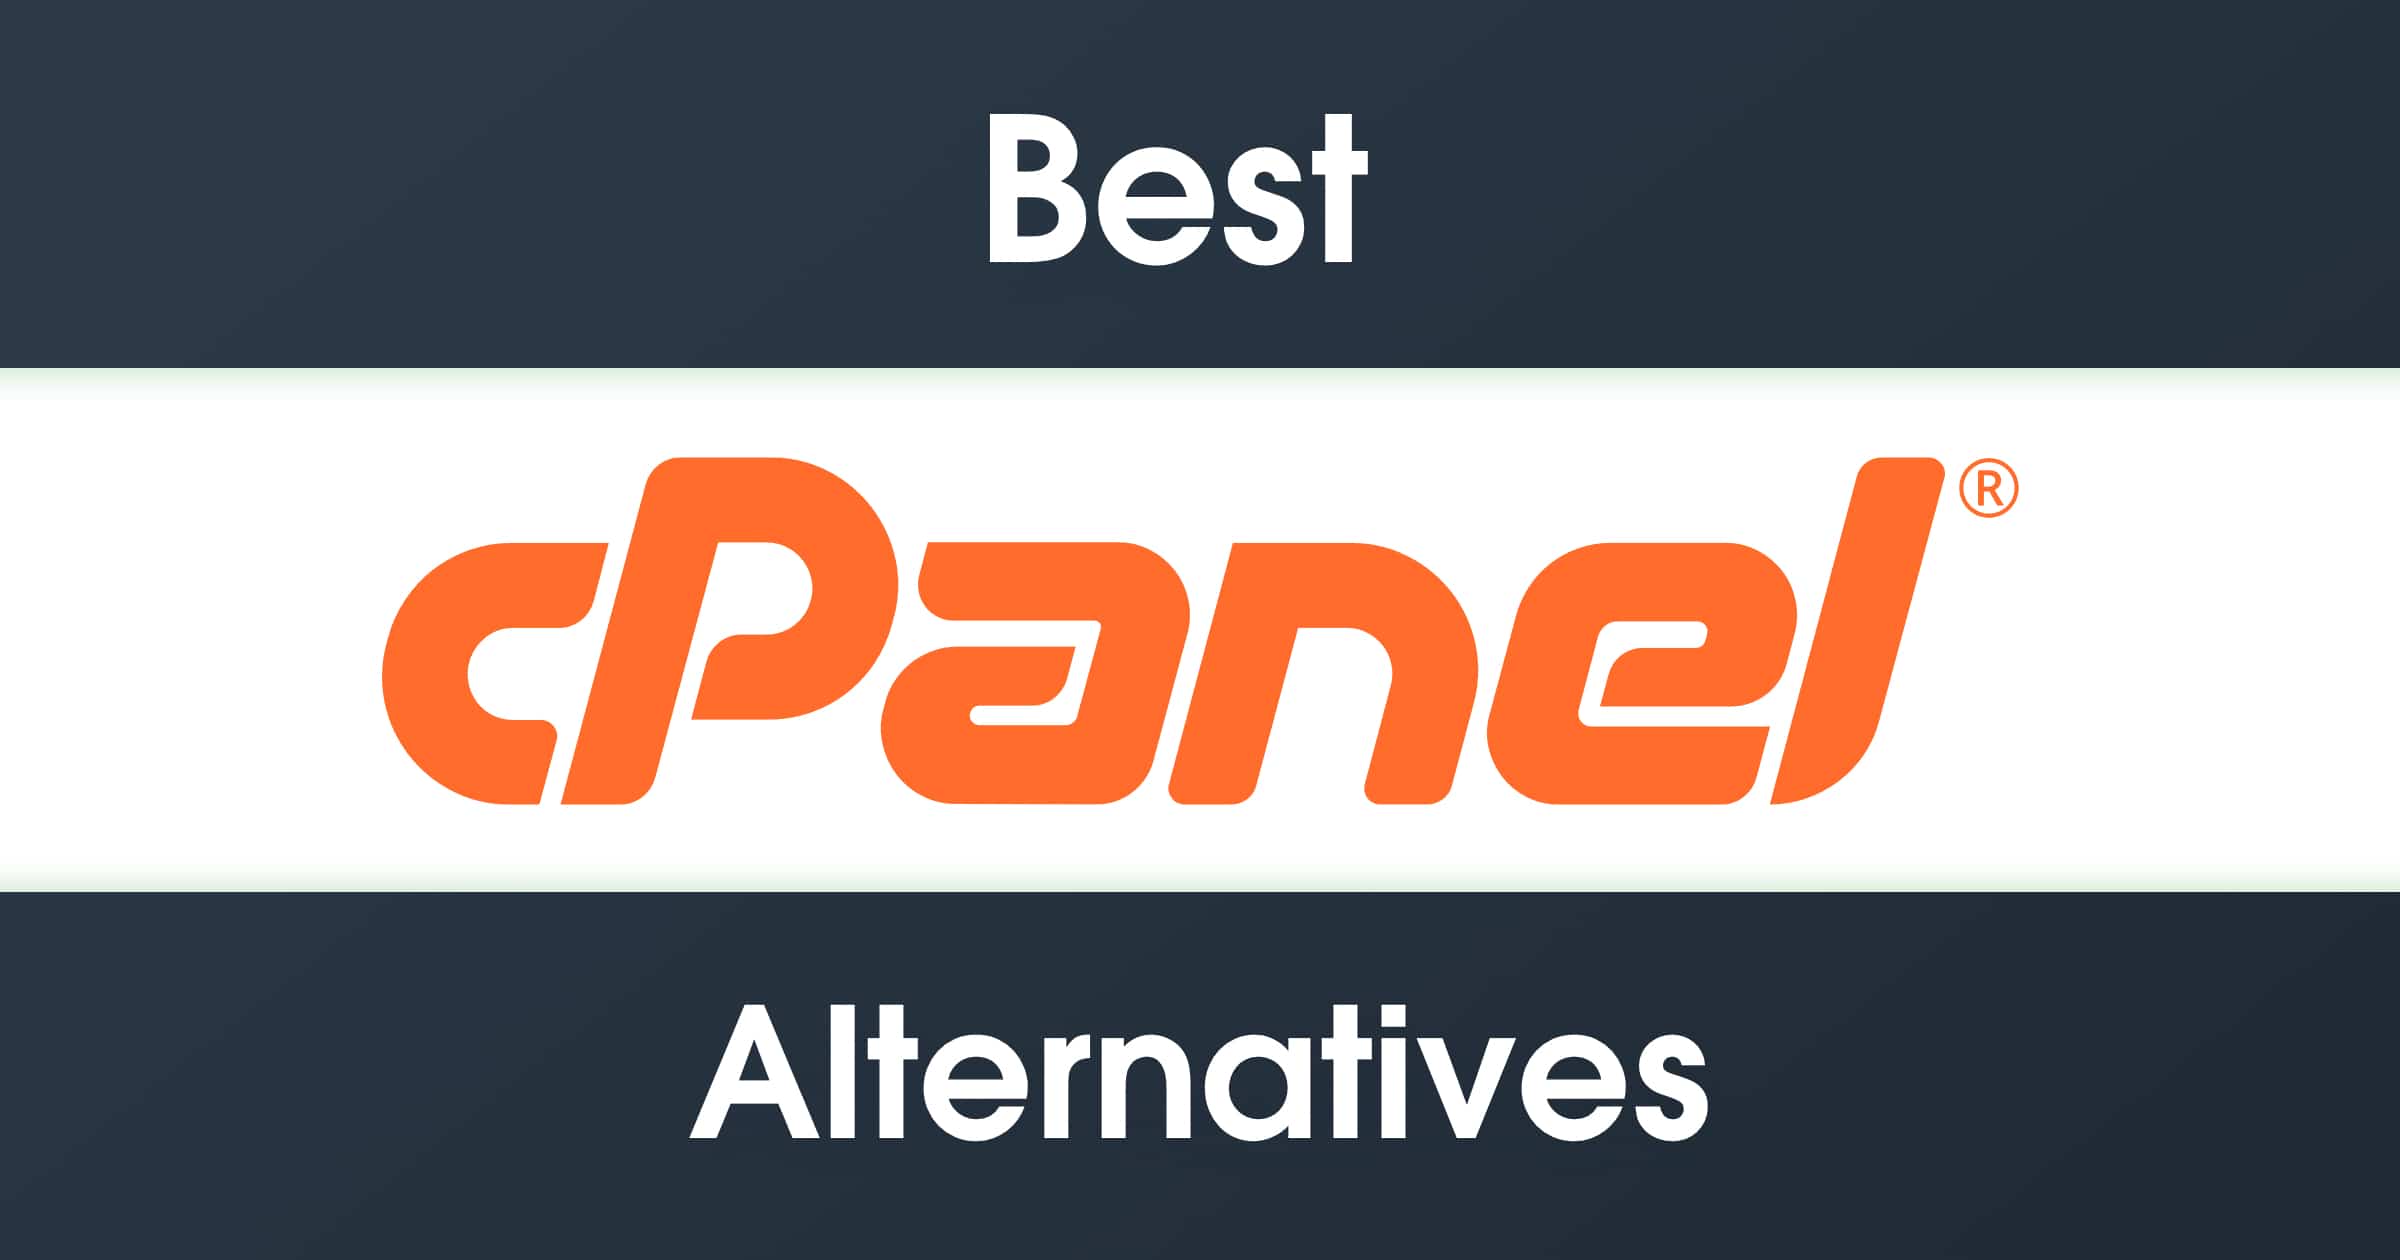 5 Best Cpanel Alternatives 2 Are 100 Free 2020 Update Images, Photos, Reviews